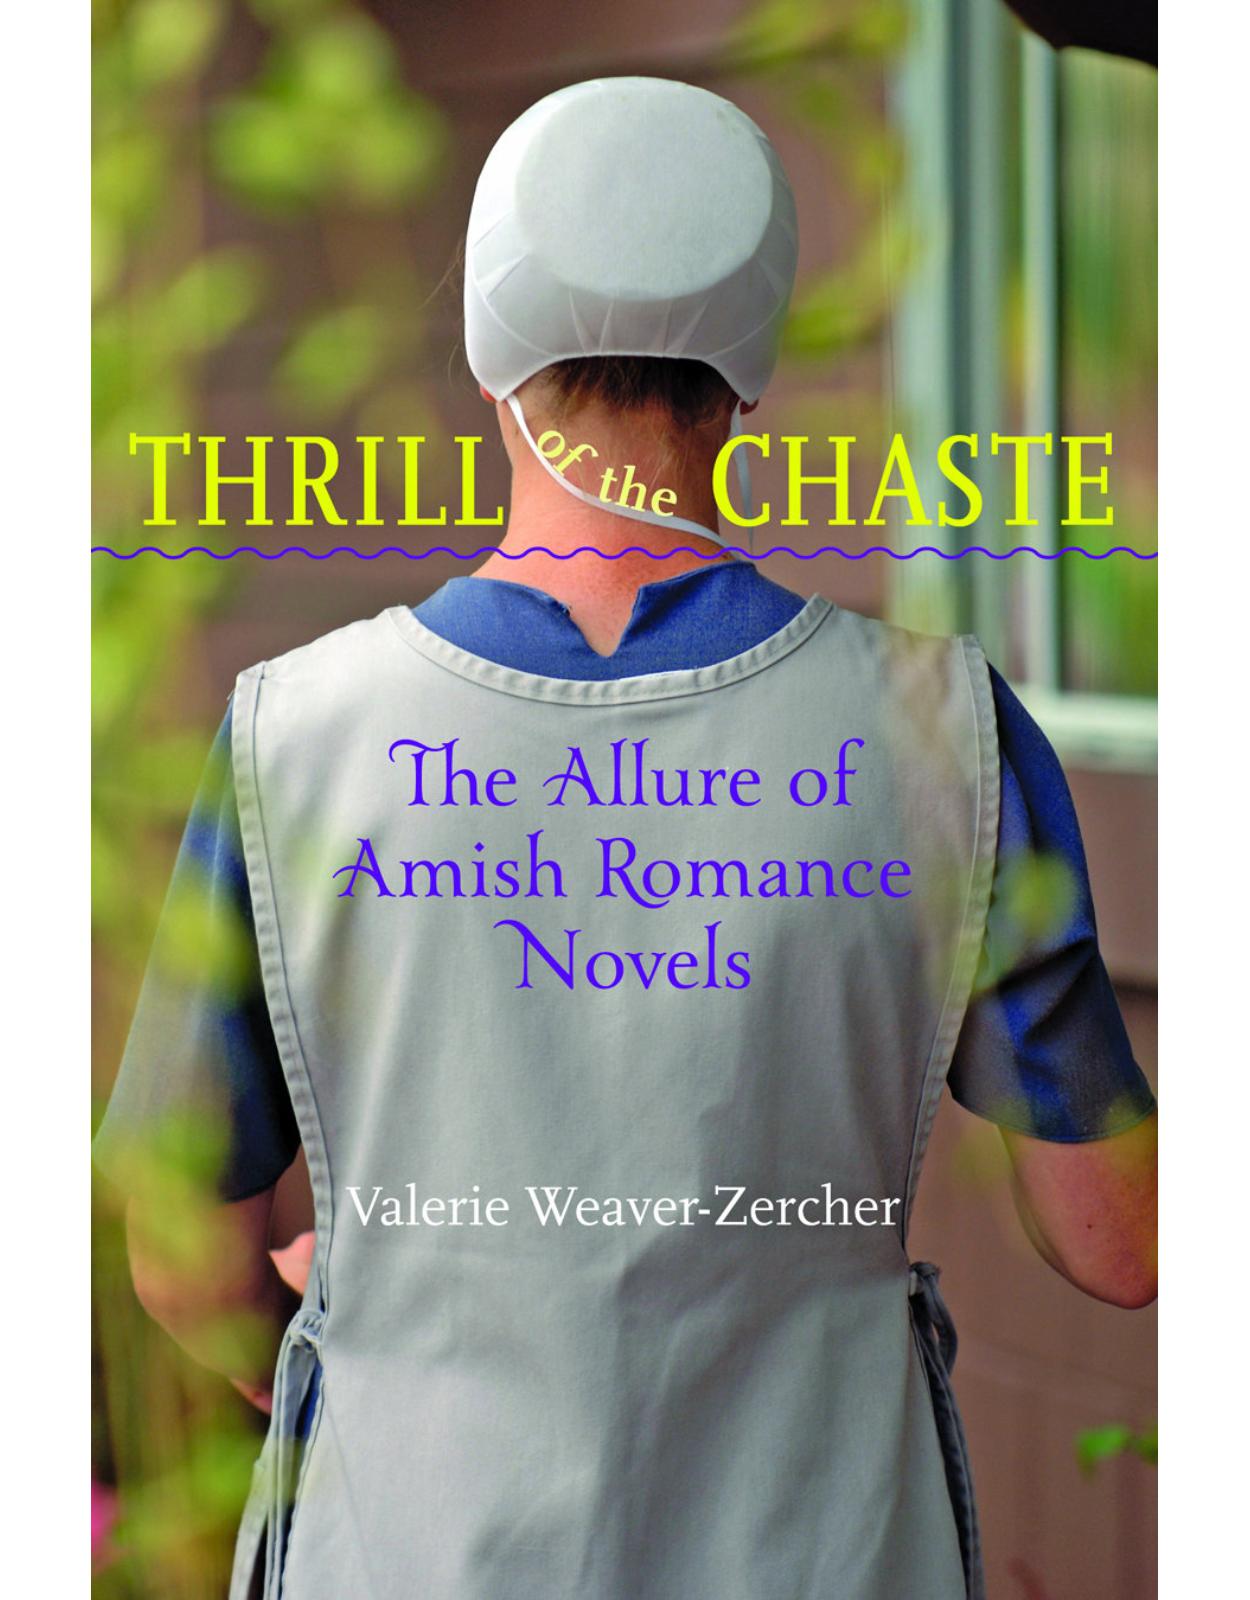 Thrill of the Chaste. The Allure of Amish Romance Novels